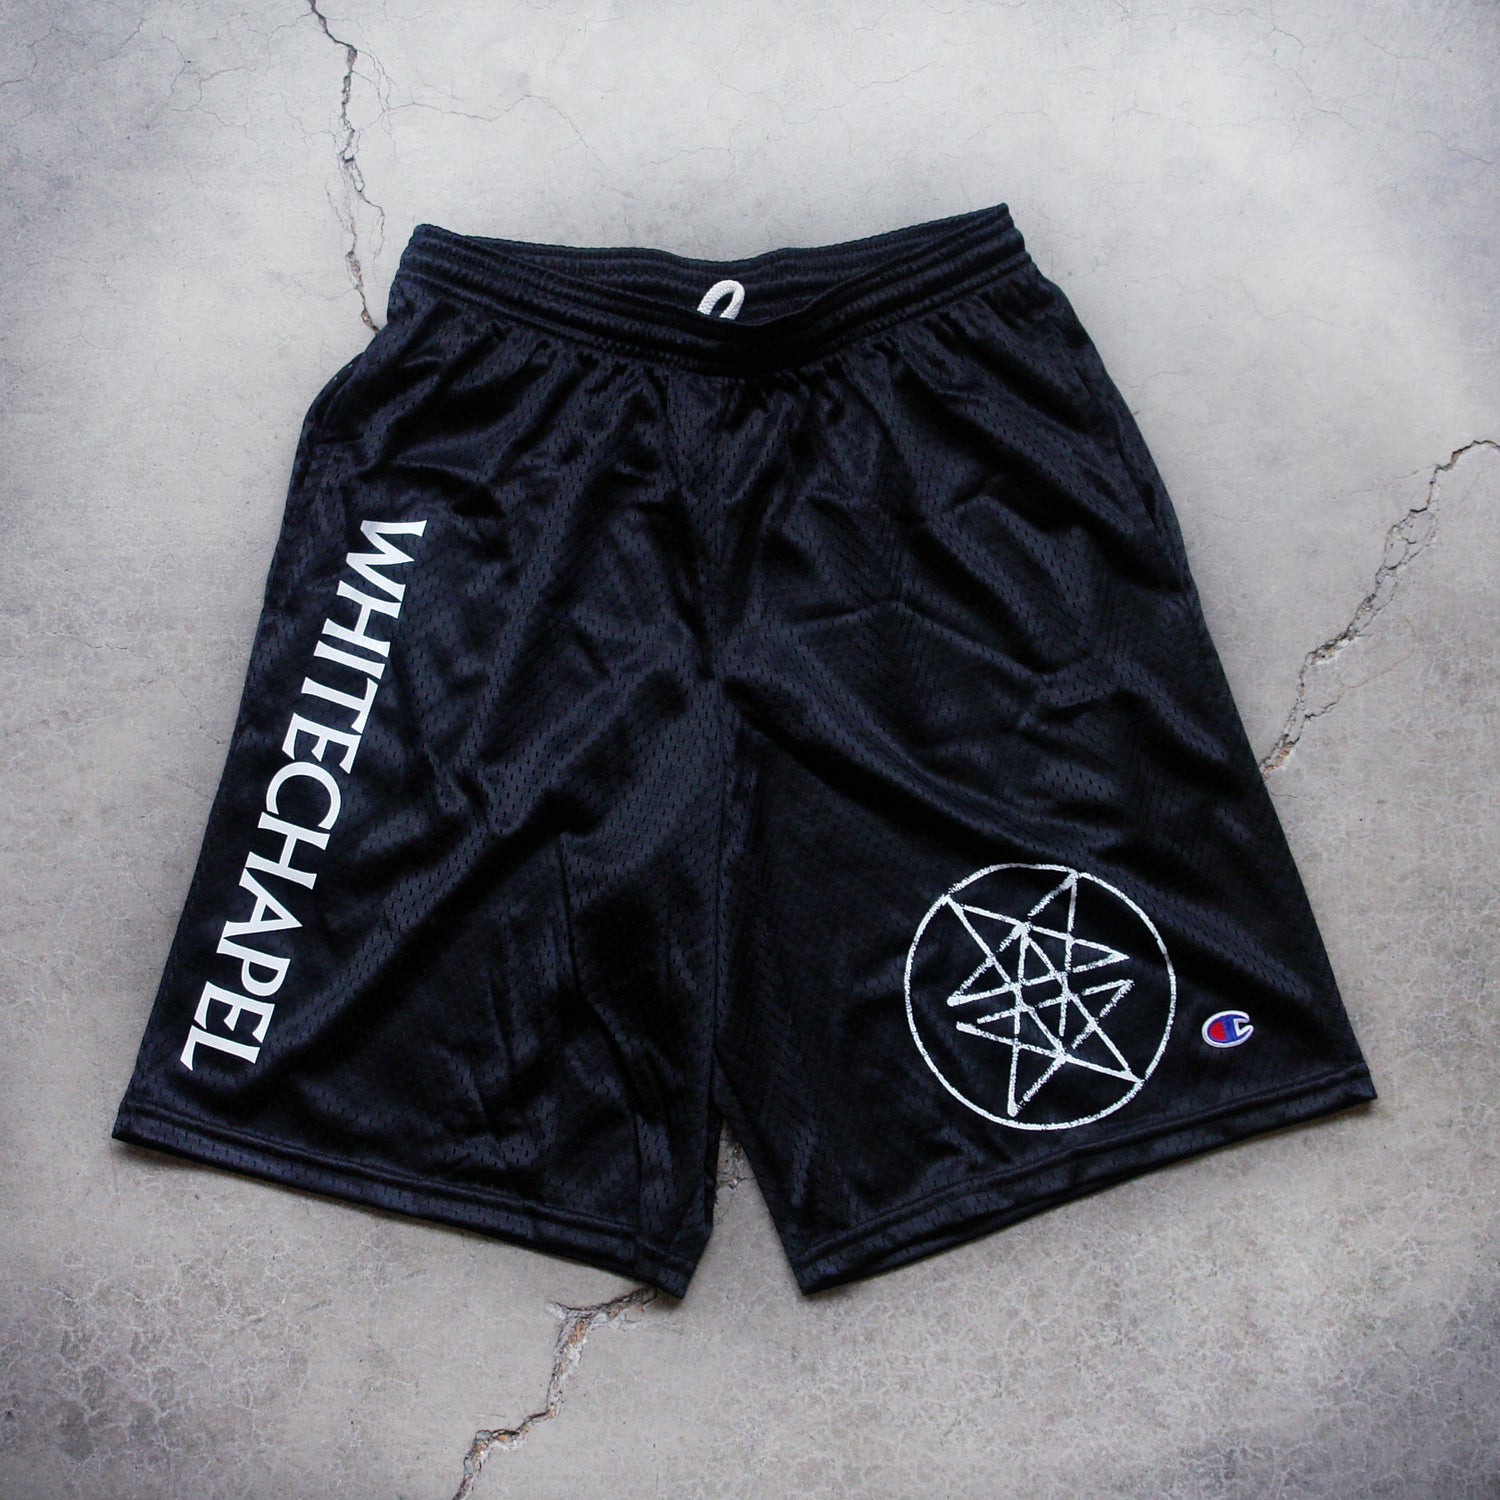 Image of black shorts against a grey concrete background. The shorts are athletic style with a drawstring. Descending down the right leg in white text says 